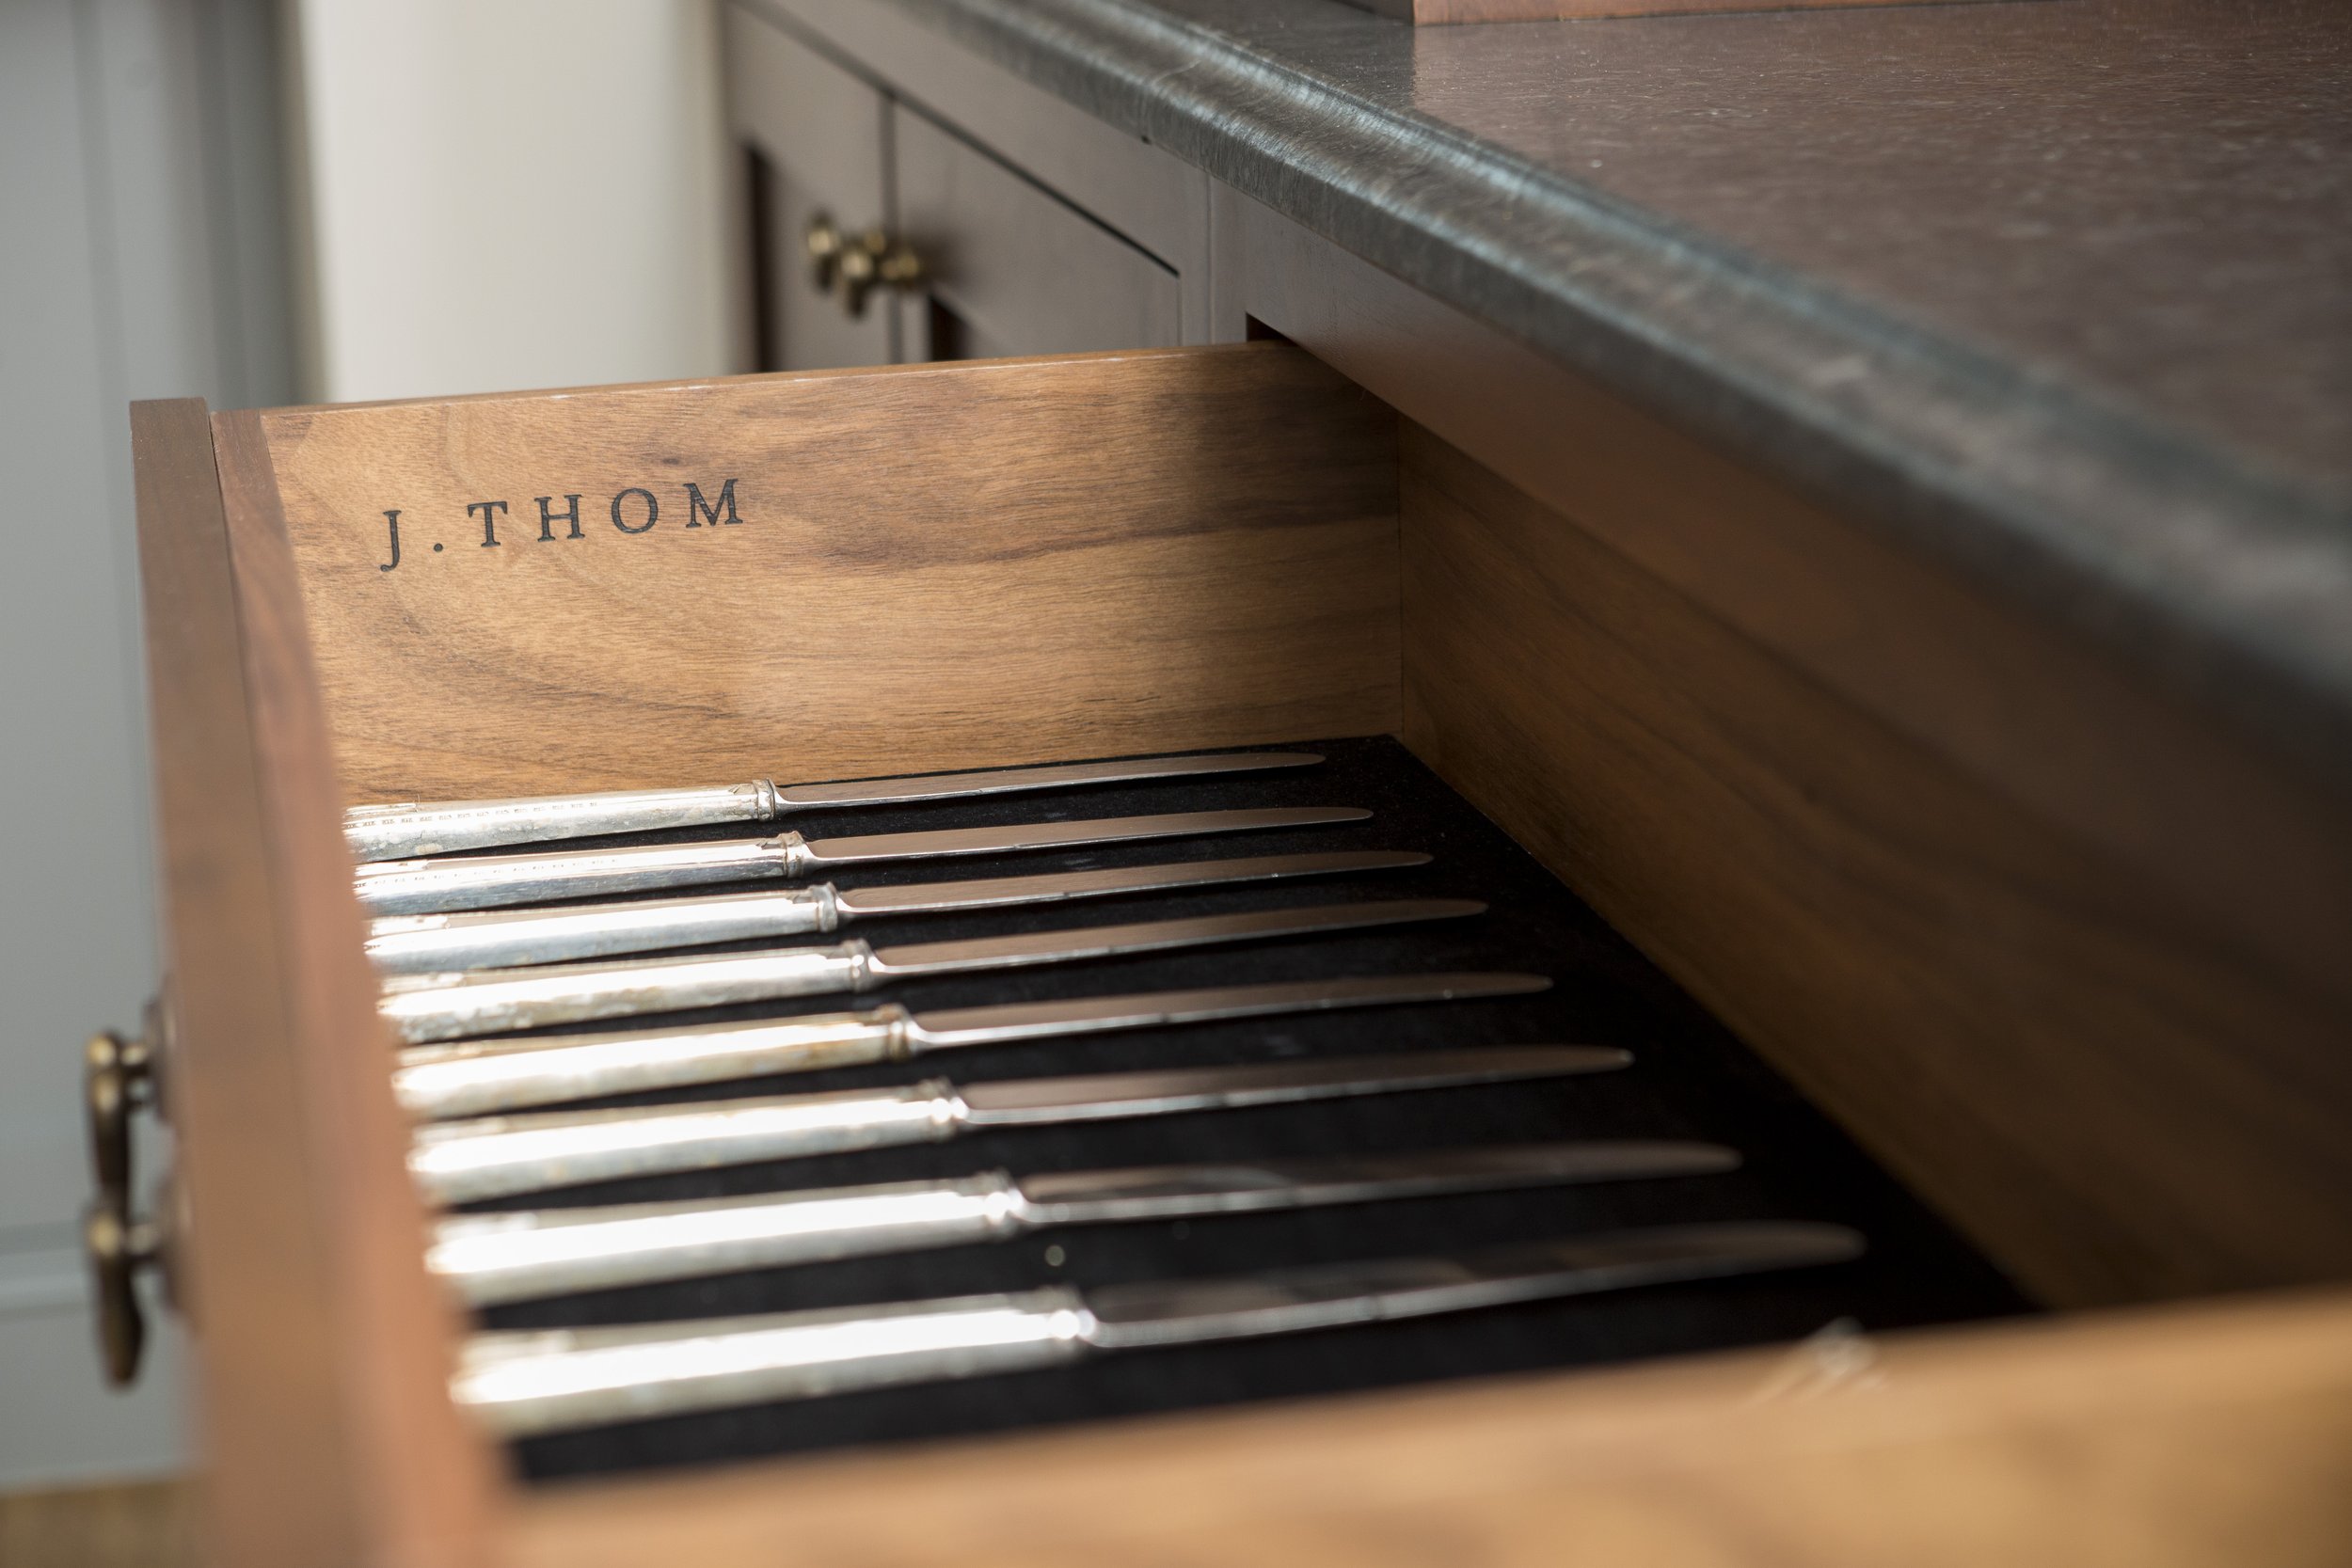 Custom cabinetry knife drawer with logo